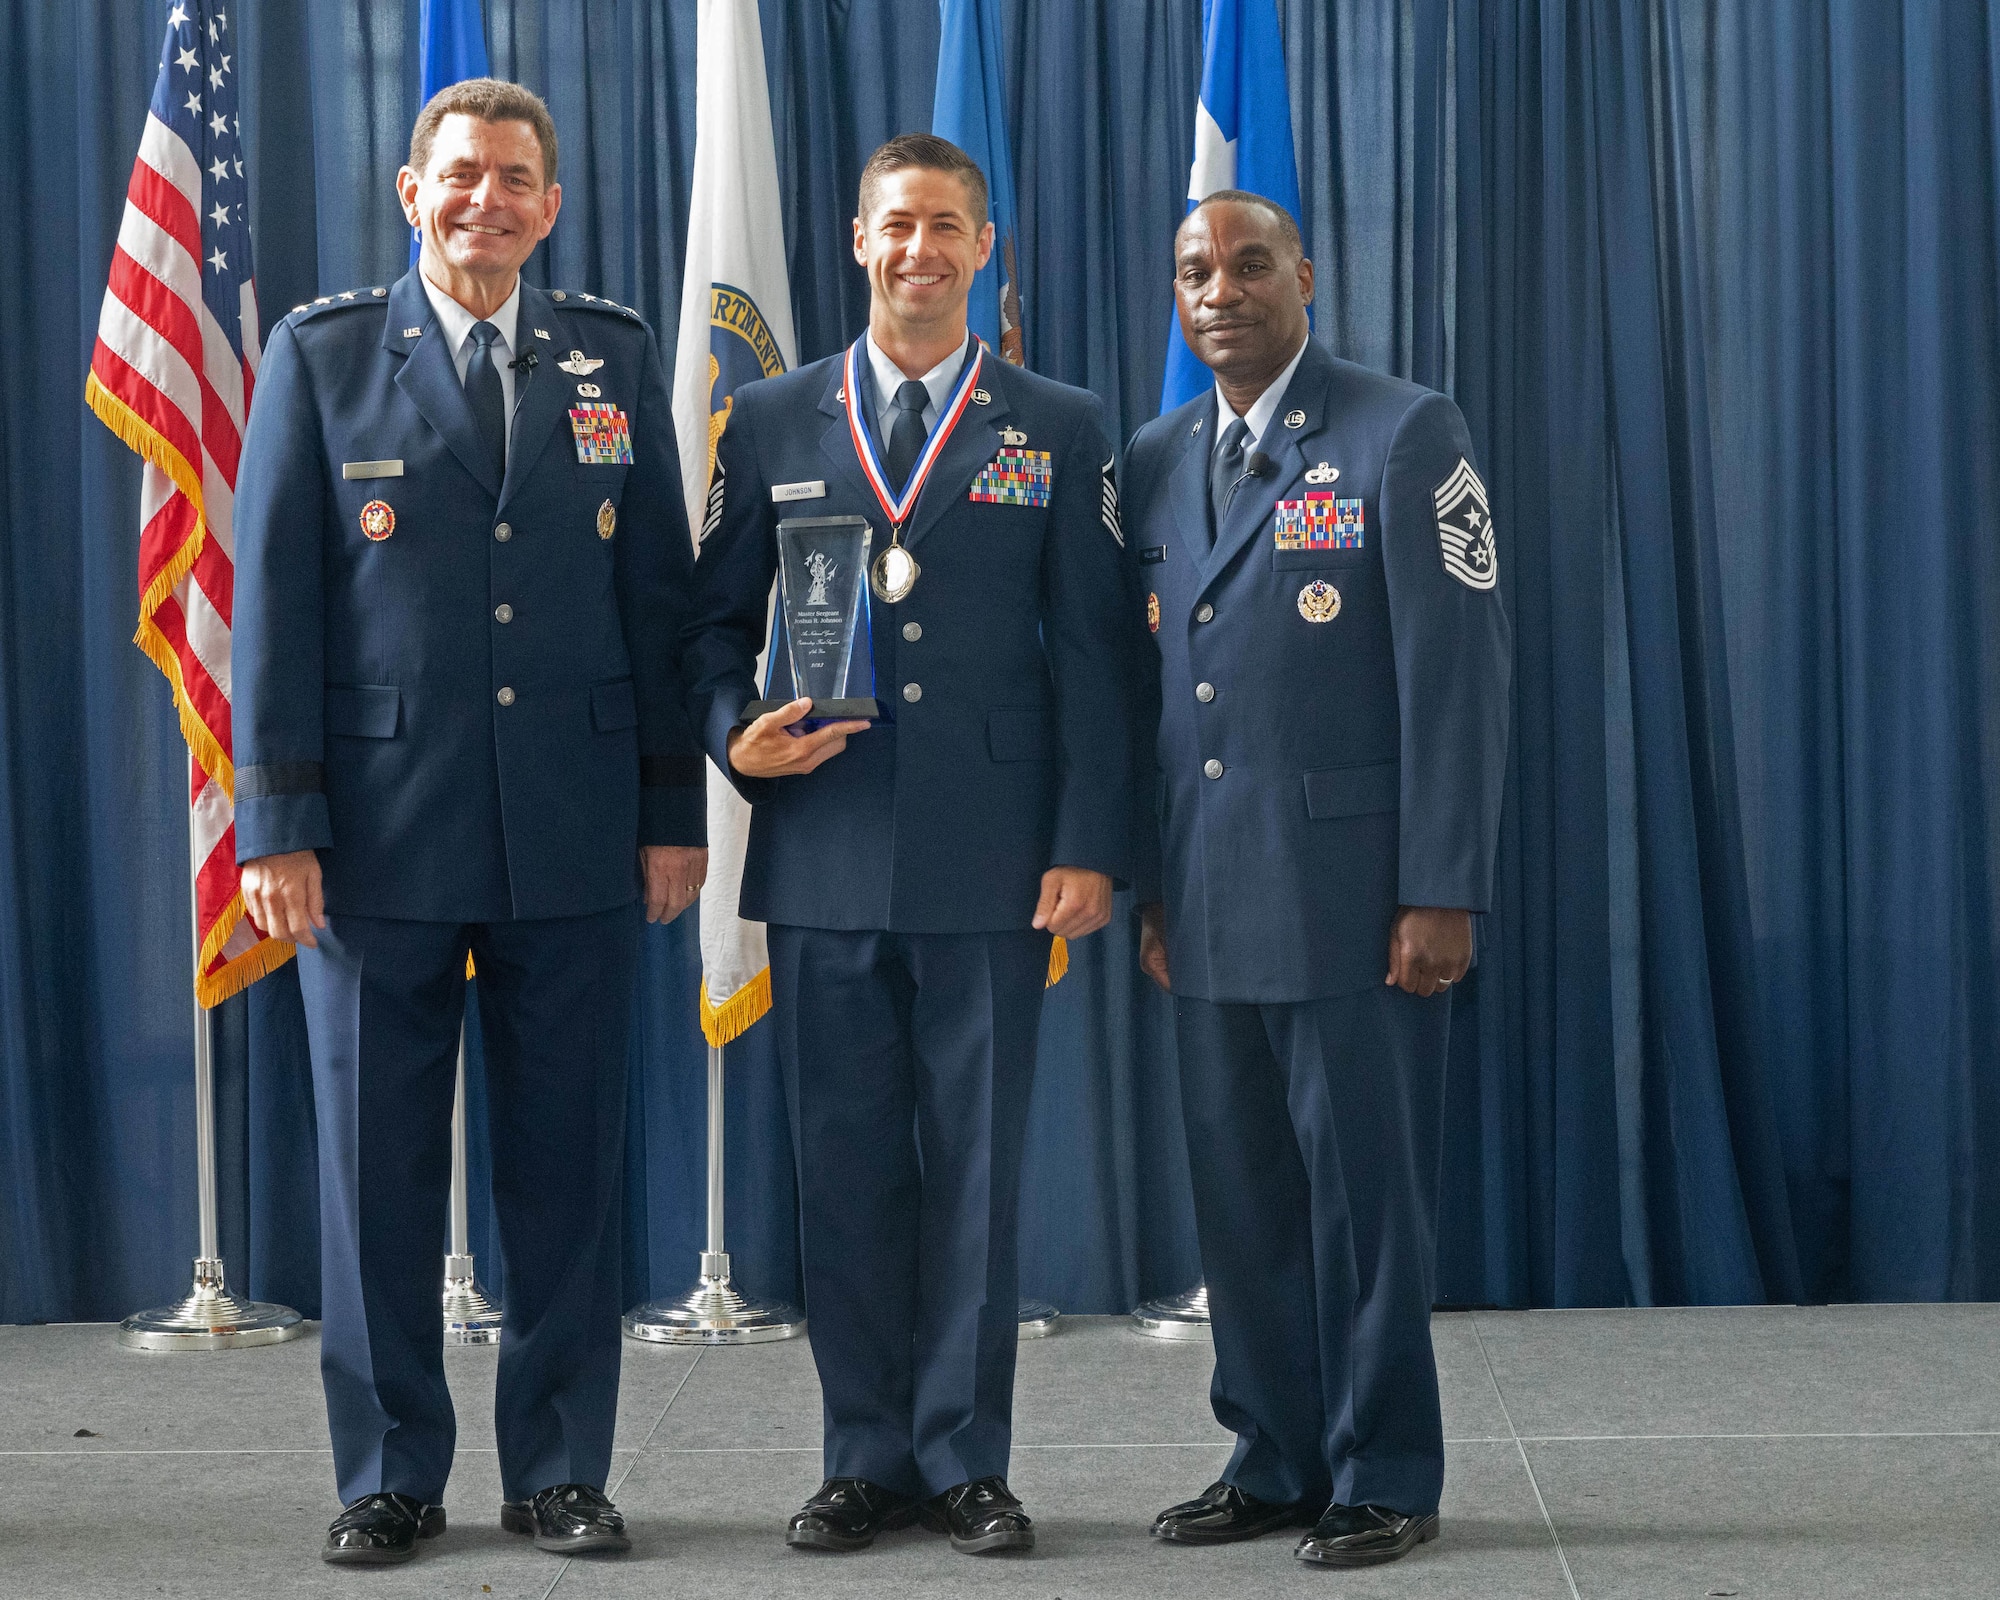 U.S. Air Force Master Sgt. Joshua Johnson, center, first sergeant, 233rd Security Forces Squadron, 140th Wing, Colorado National Guard poses with Lt. Gen. Michael Loh, left, director, Air National Guard and Chief Master Sgt. Maurice Williams, command chief, ANG, after being recognized as the ANG’s Outstanding First Sergeant of the Year at the Air National Guard Readiness Center, Joint Base Andrews, Maryland, Aug. 24, 2023.